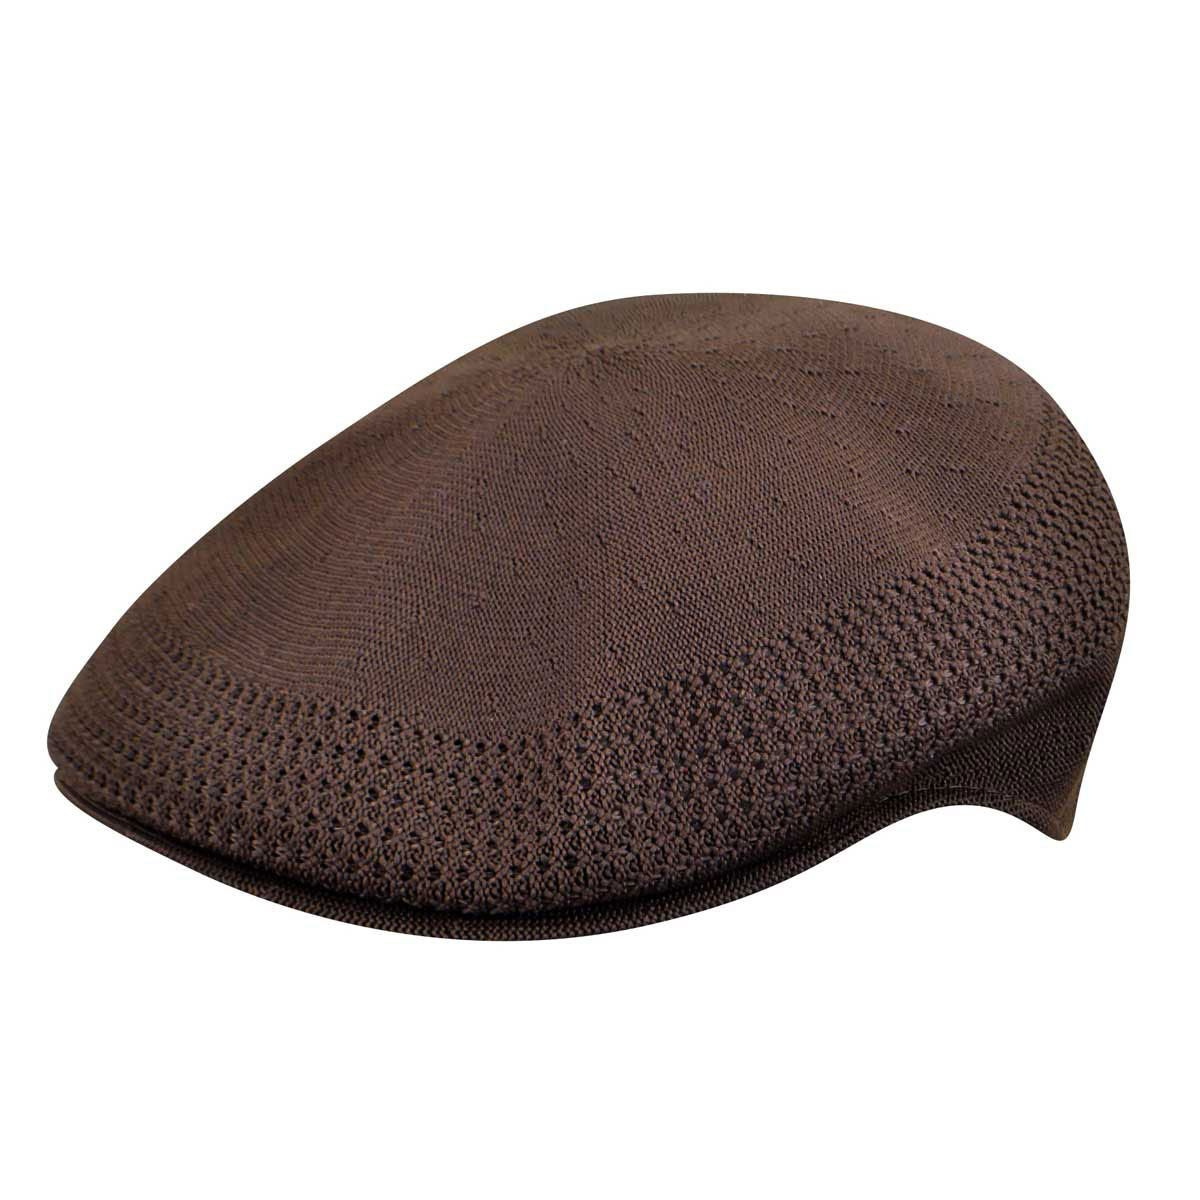 Kangol 504 cap - summer marine Reference : 11566 | Chapellerie Traclet